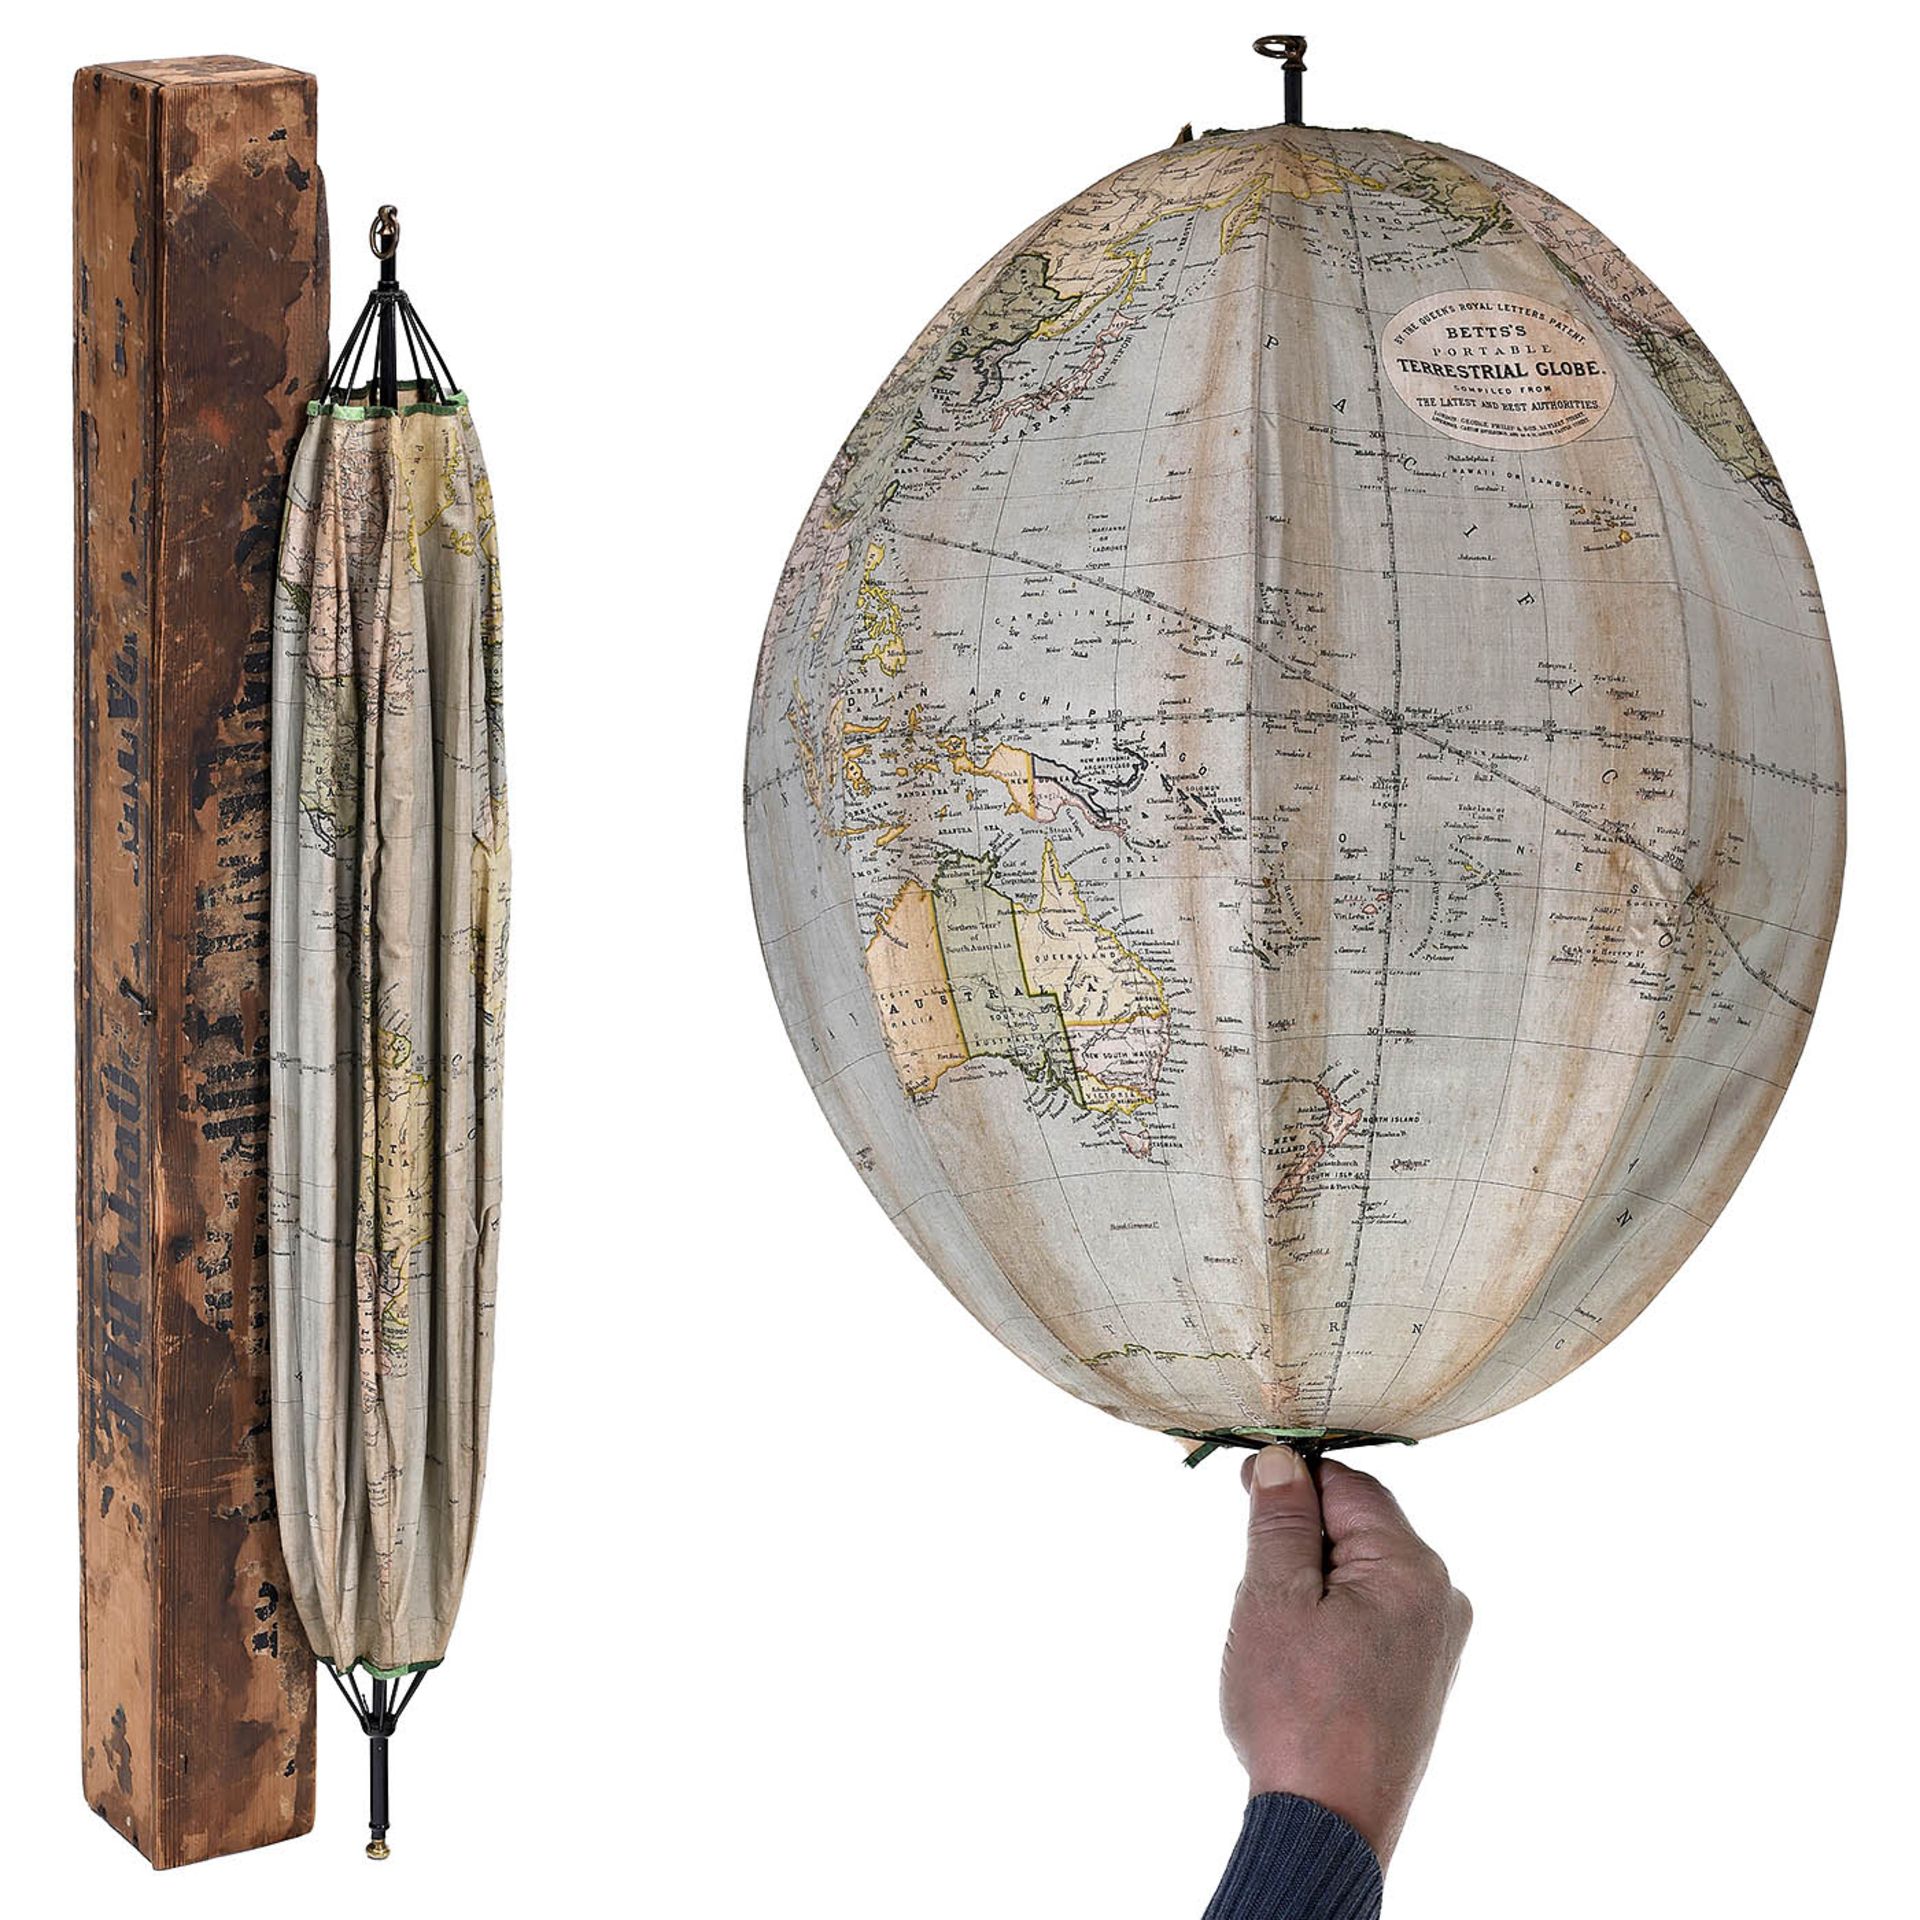 Bett's 16-Inch Collapsible Terrestrial Globe, c. 1880 - Image 2 of 5